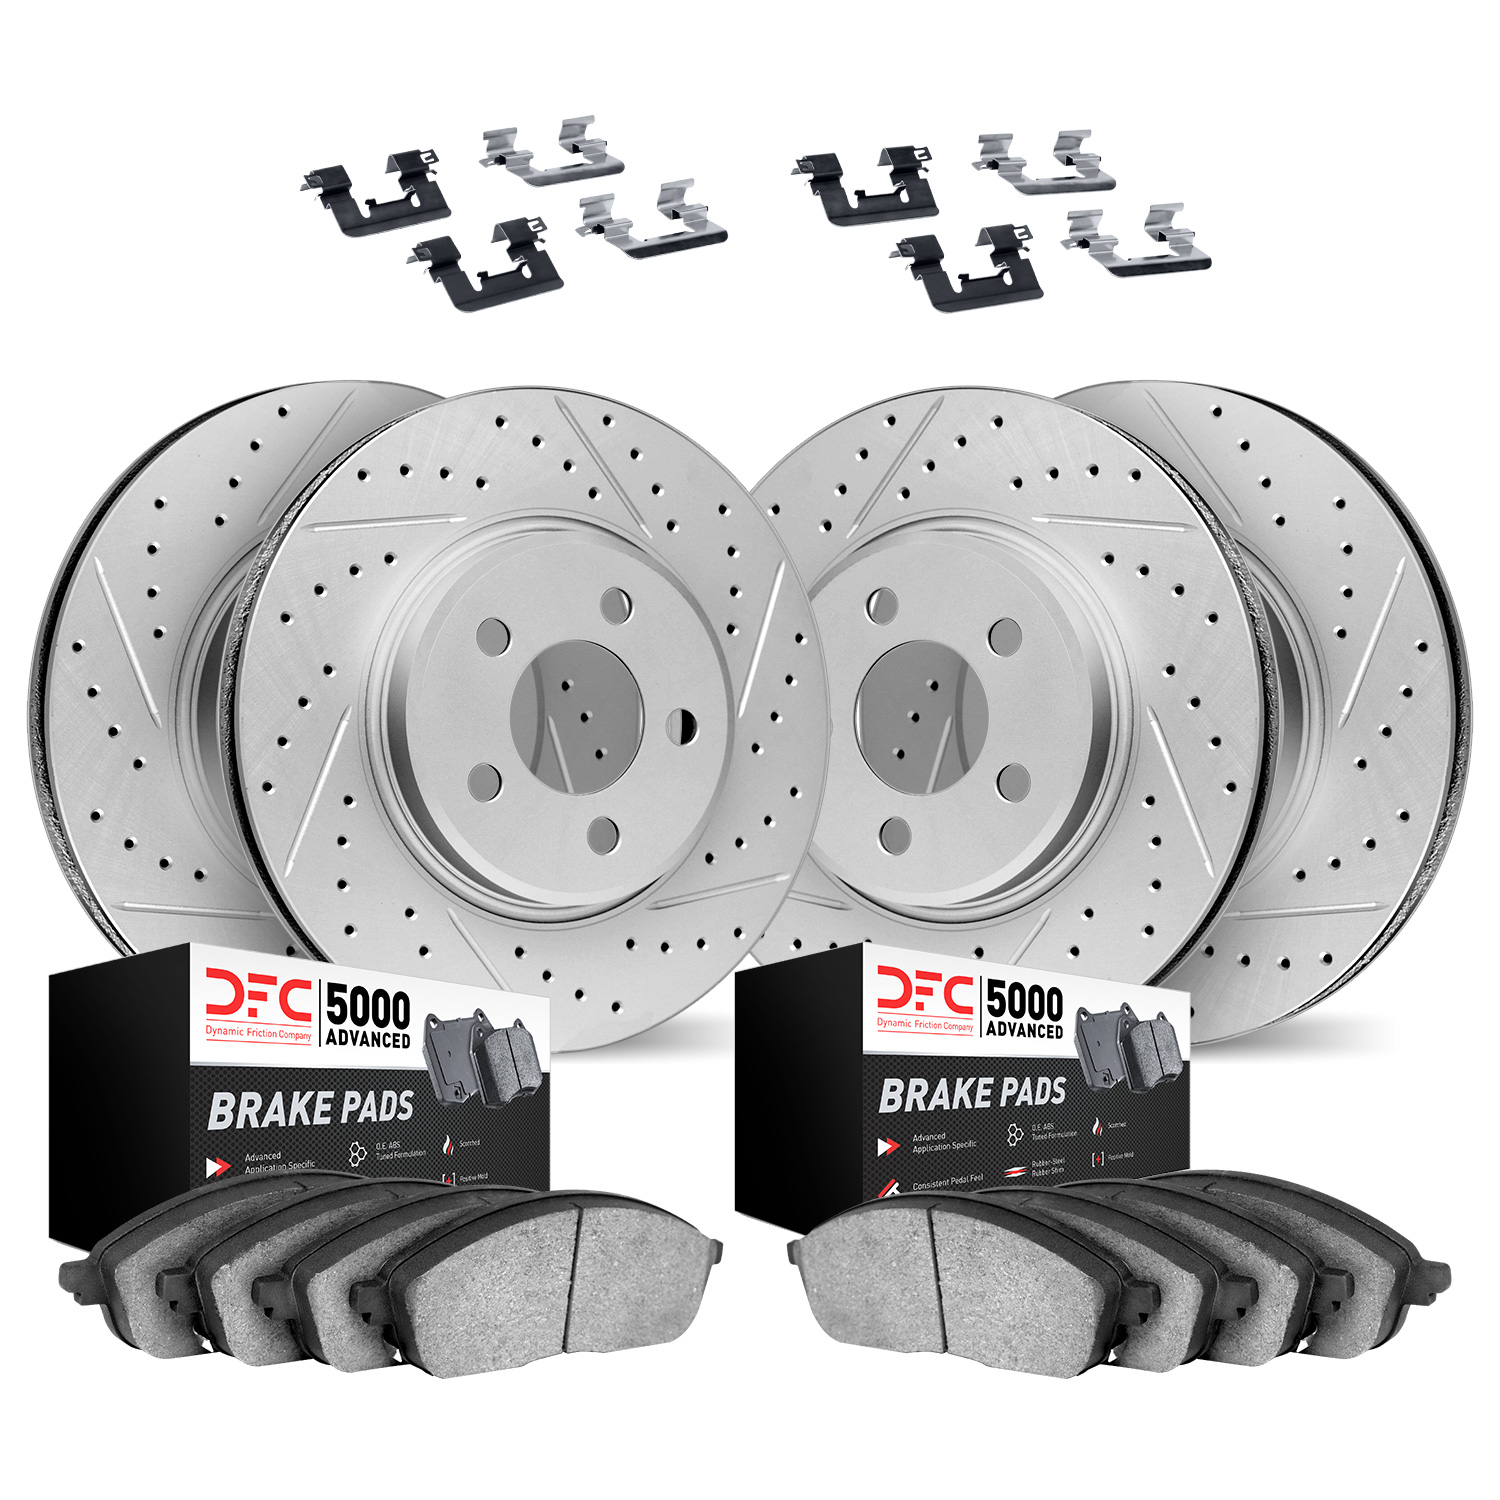 2514-31035 Geoperformance Drilled/Slotted Rotors w/5000 Advanced Brake Pads Kit & Hardware, 2016-2020 BMW, Position: Front and R